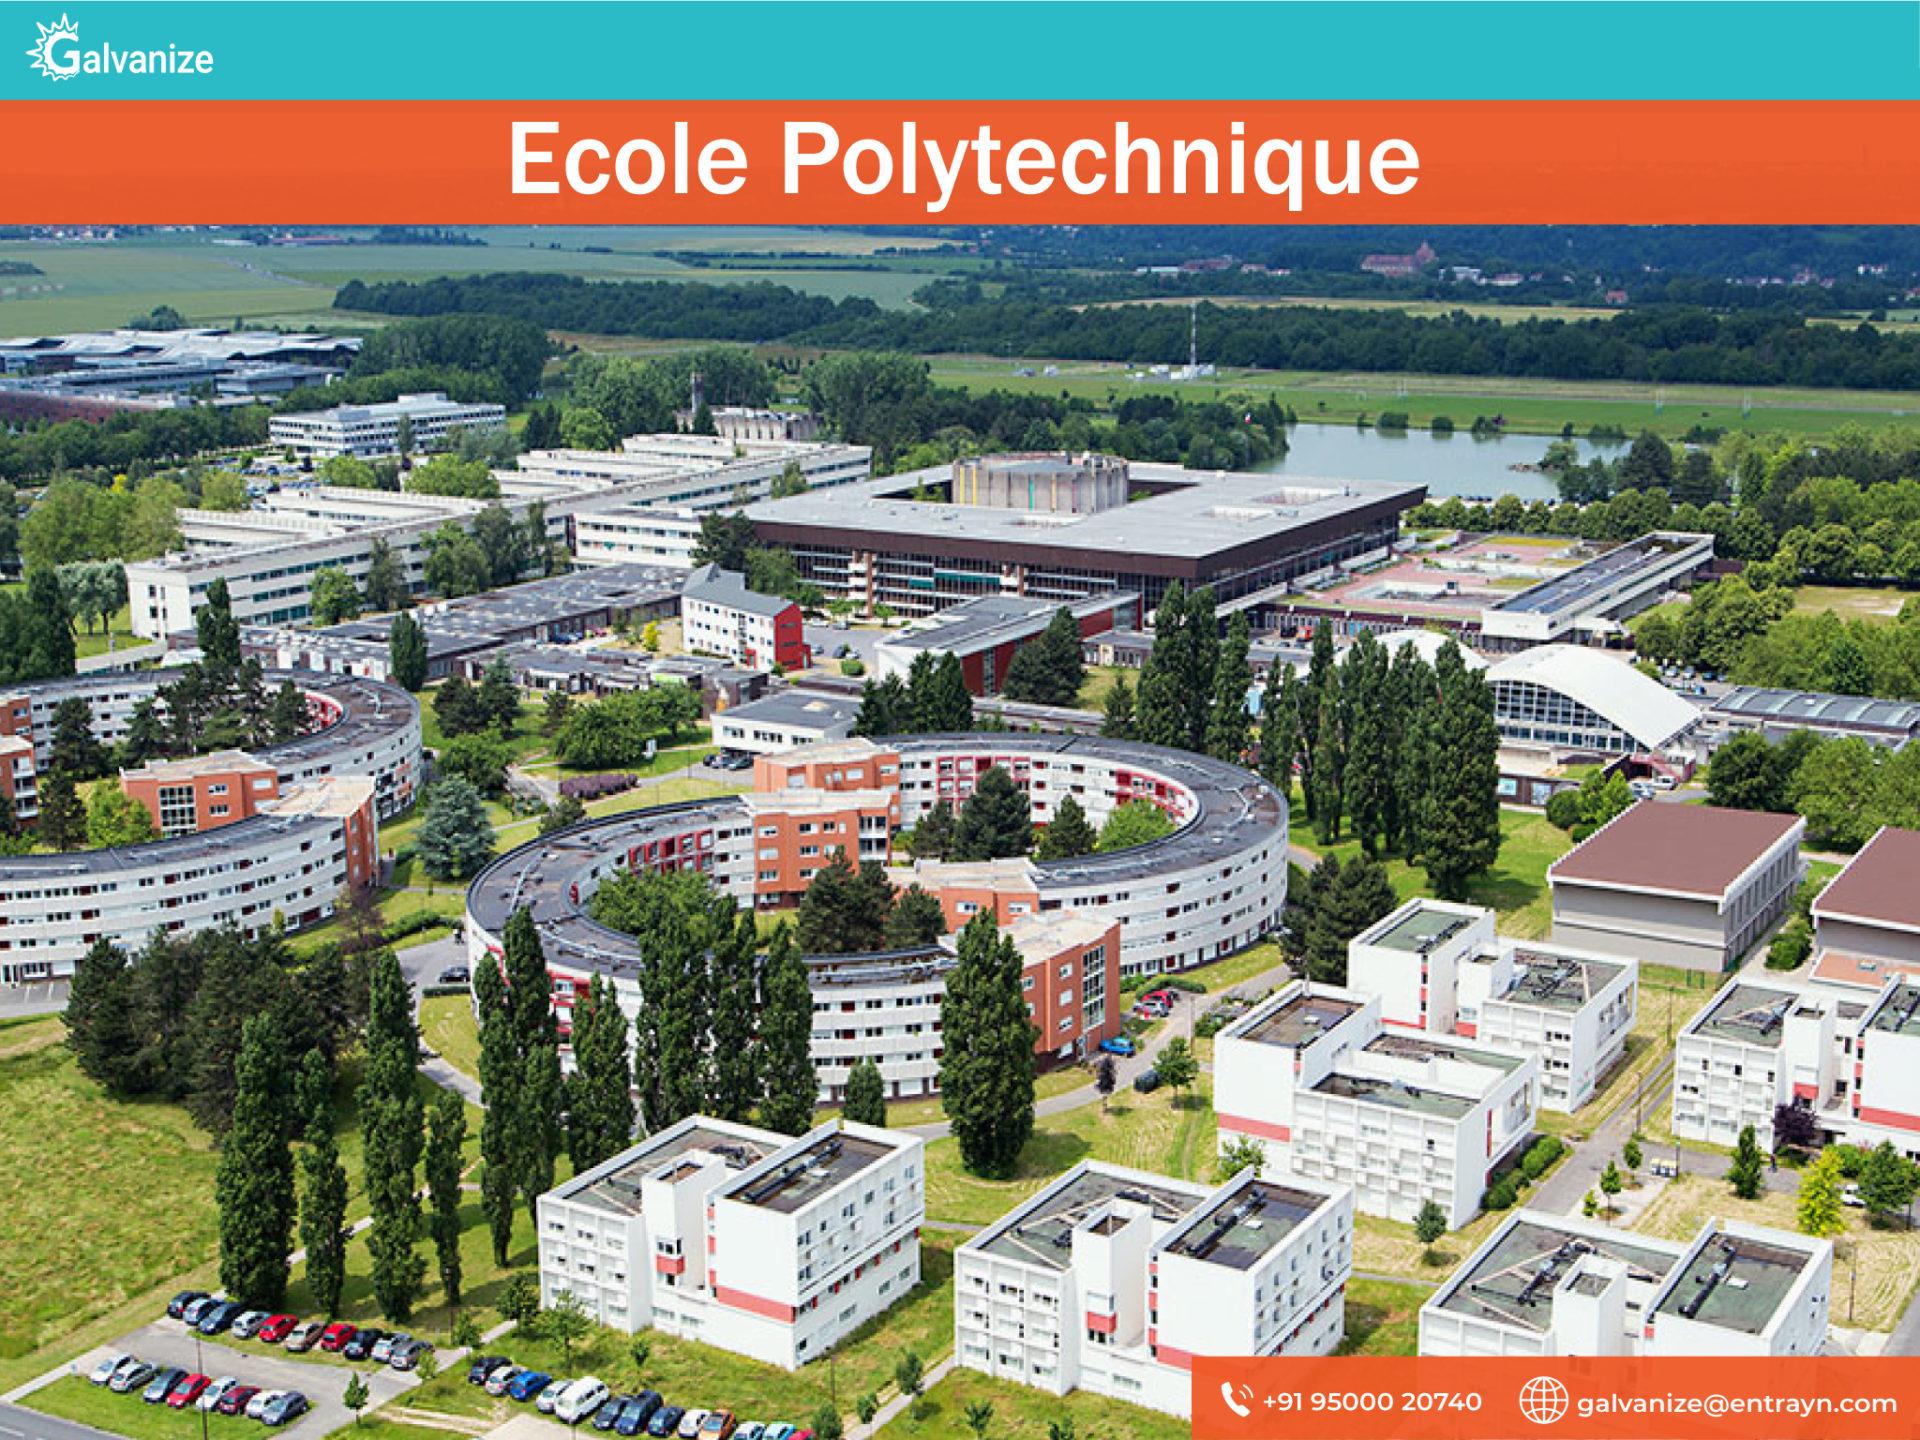 Ecole PolytechniqueEcole Polytechnique | Top Universities in france